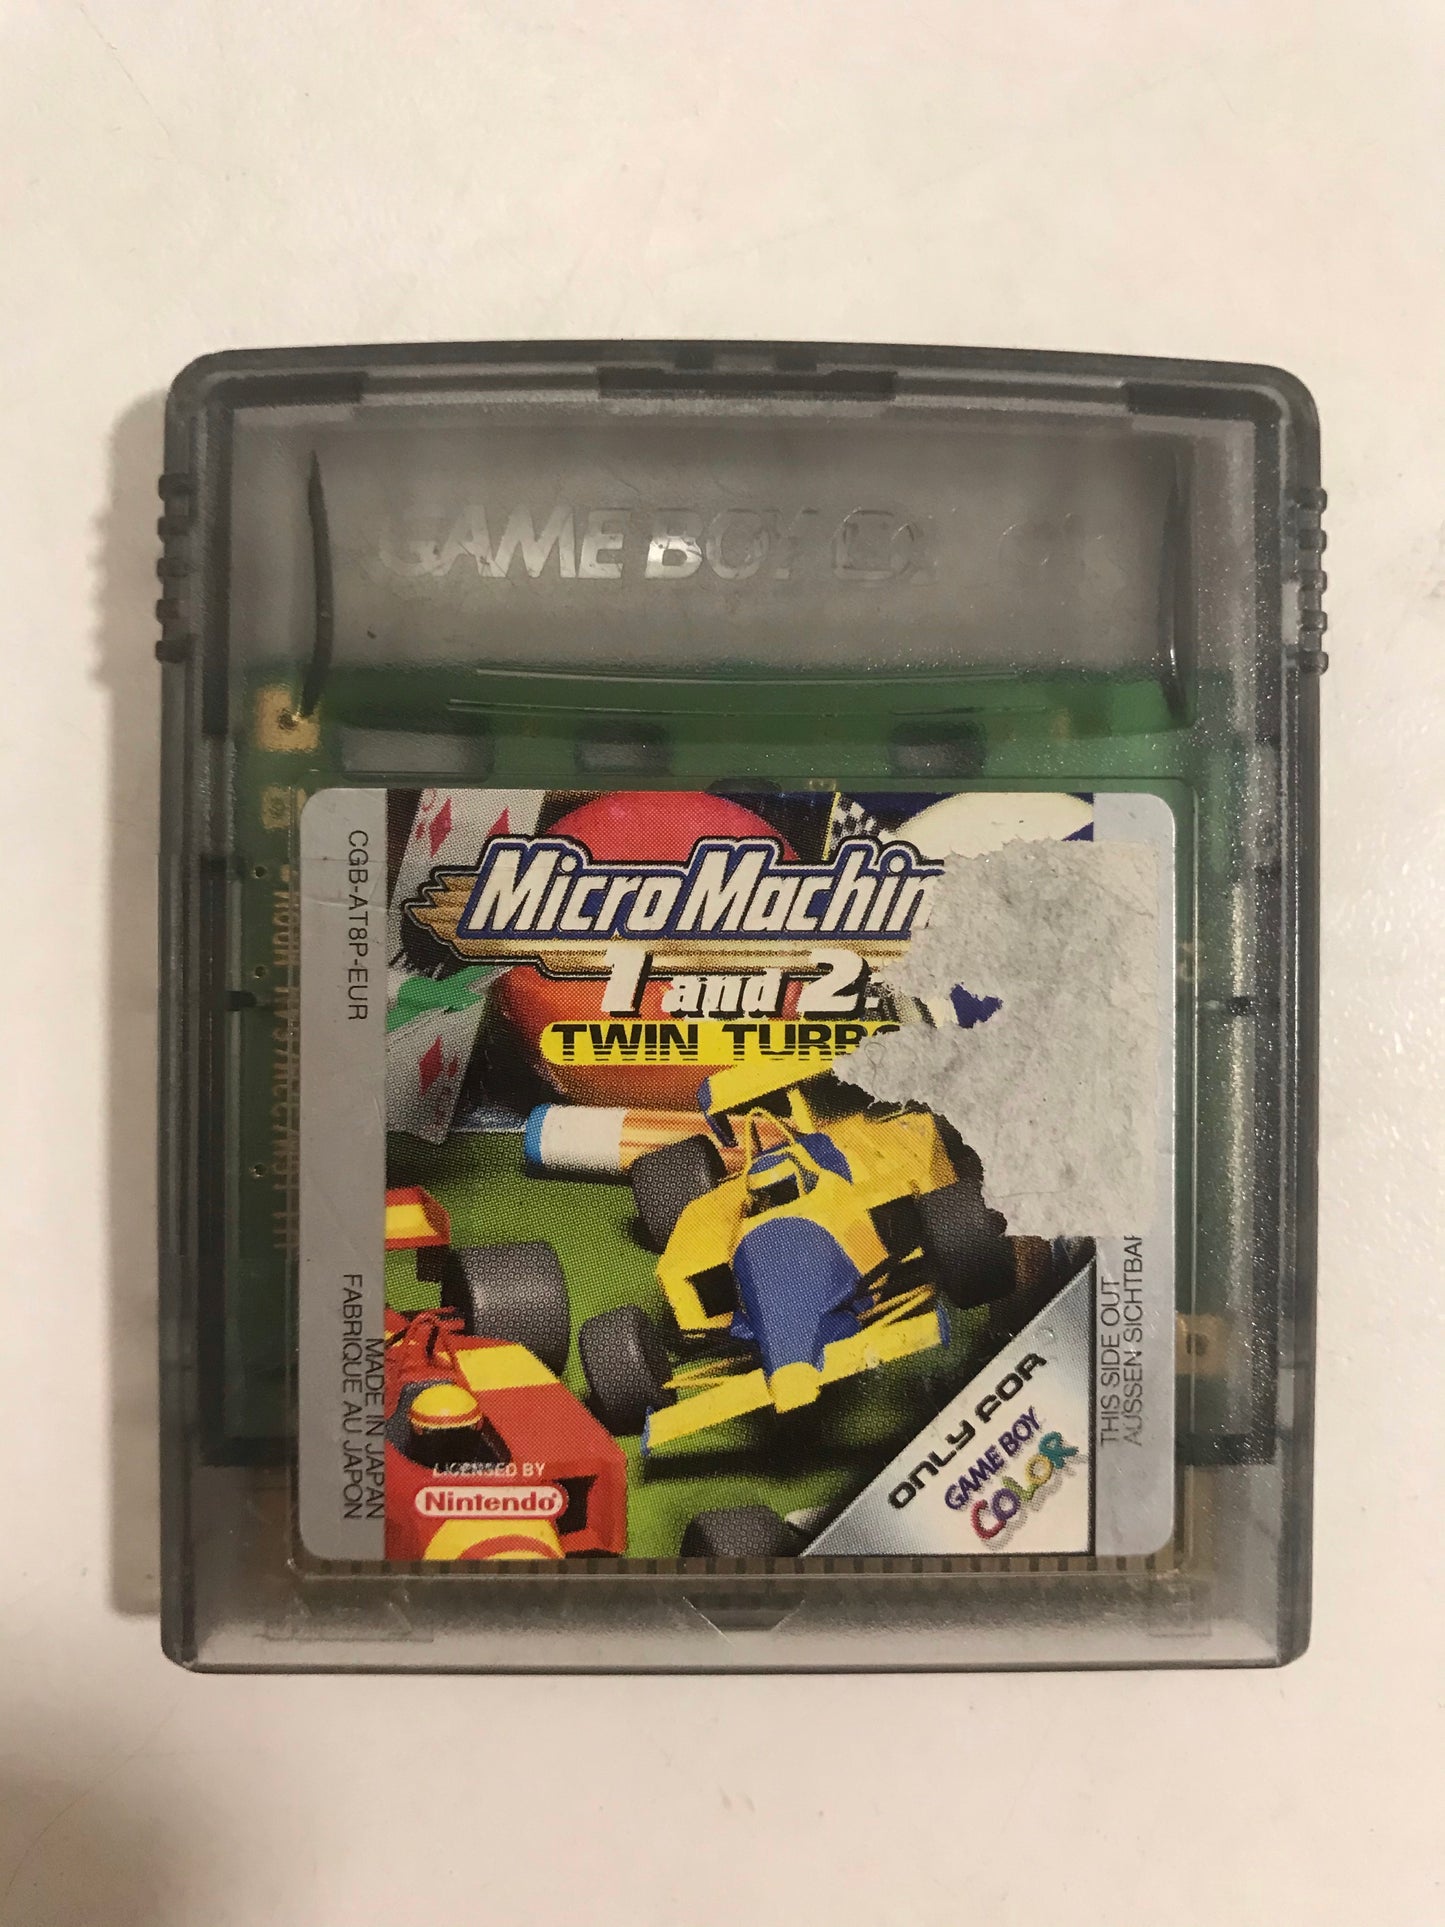 Micro machines 1 and 2 twin turbo Nintendo Game boy color avec notice